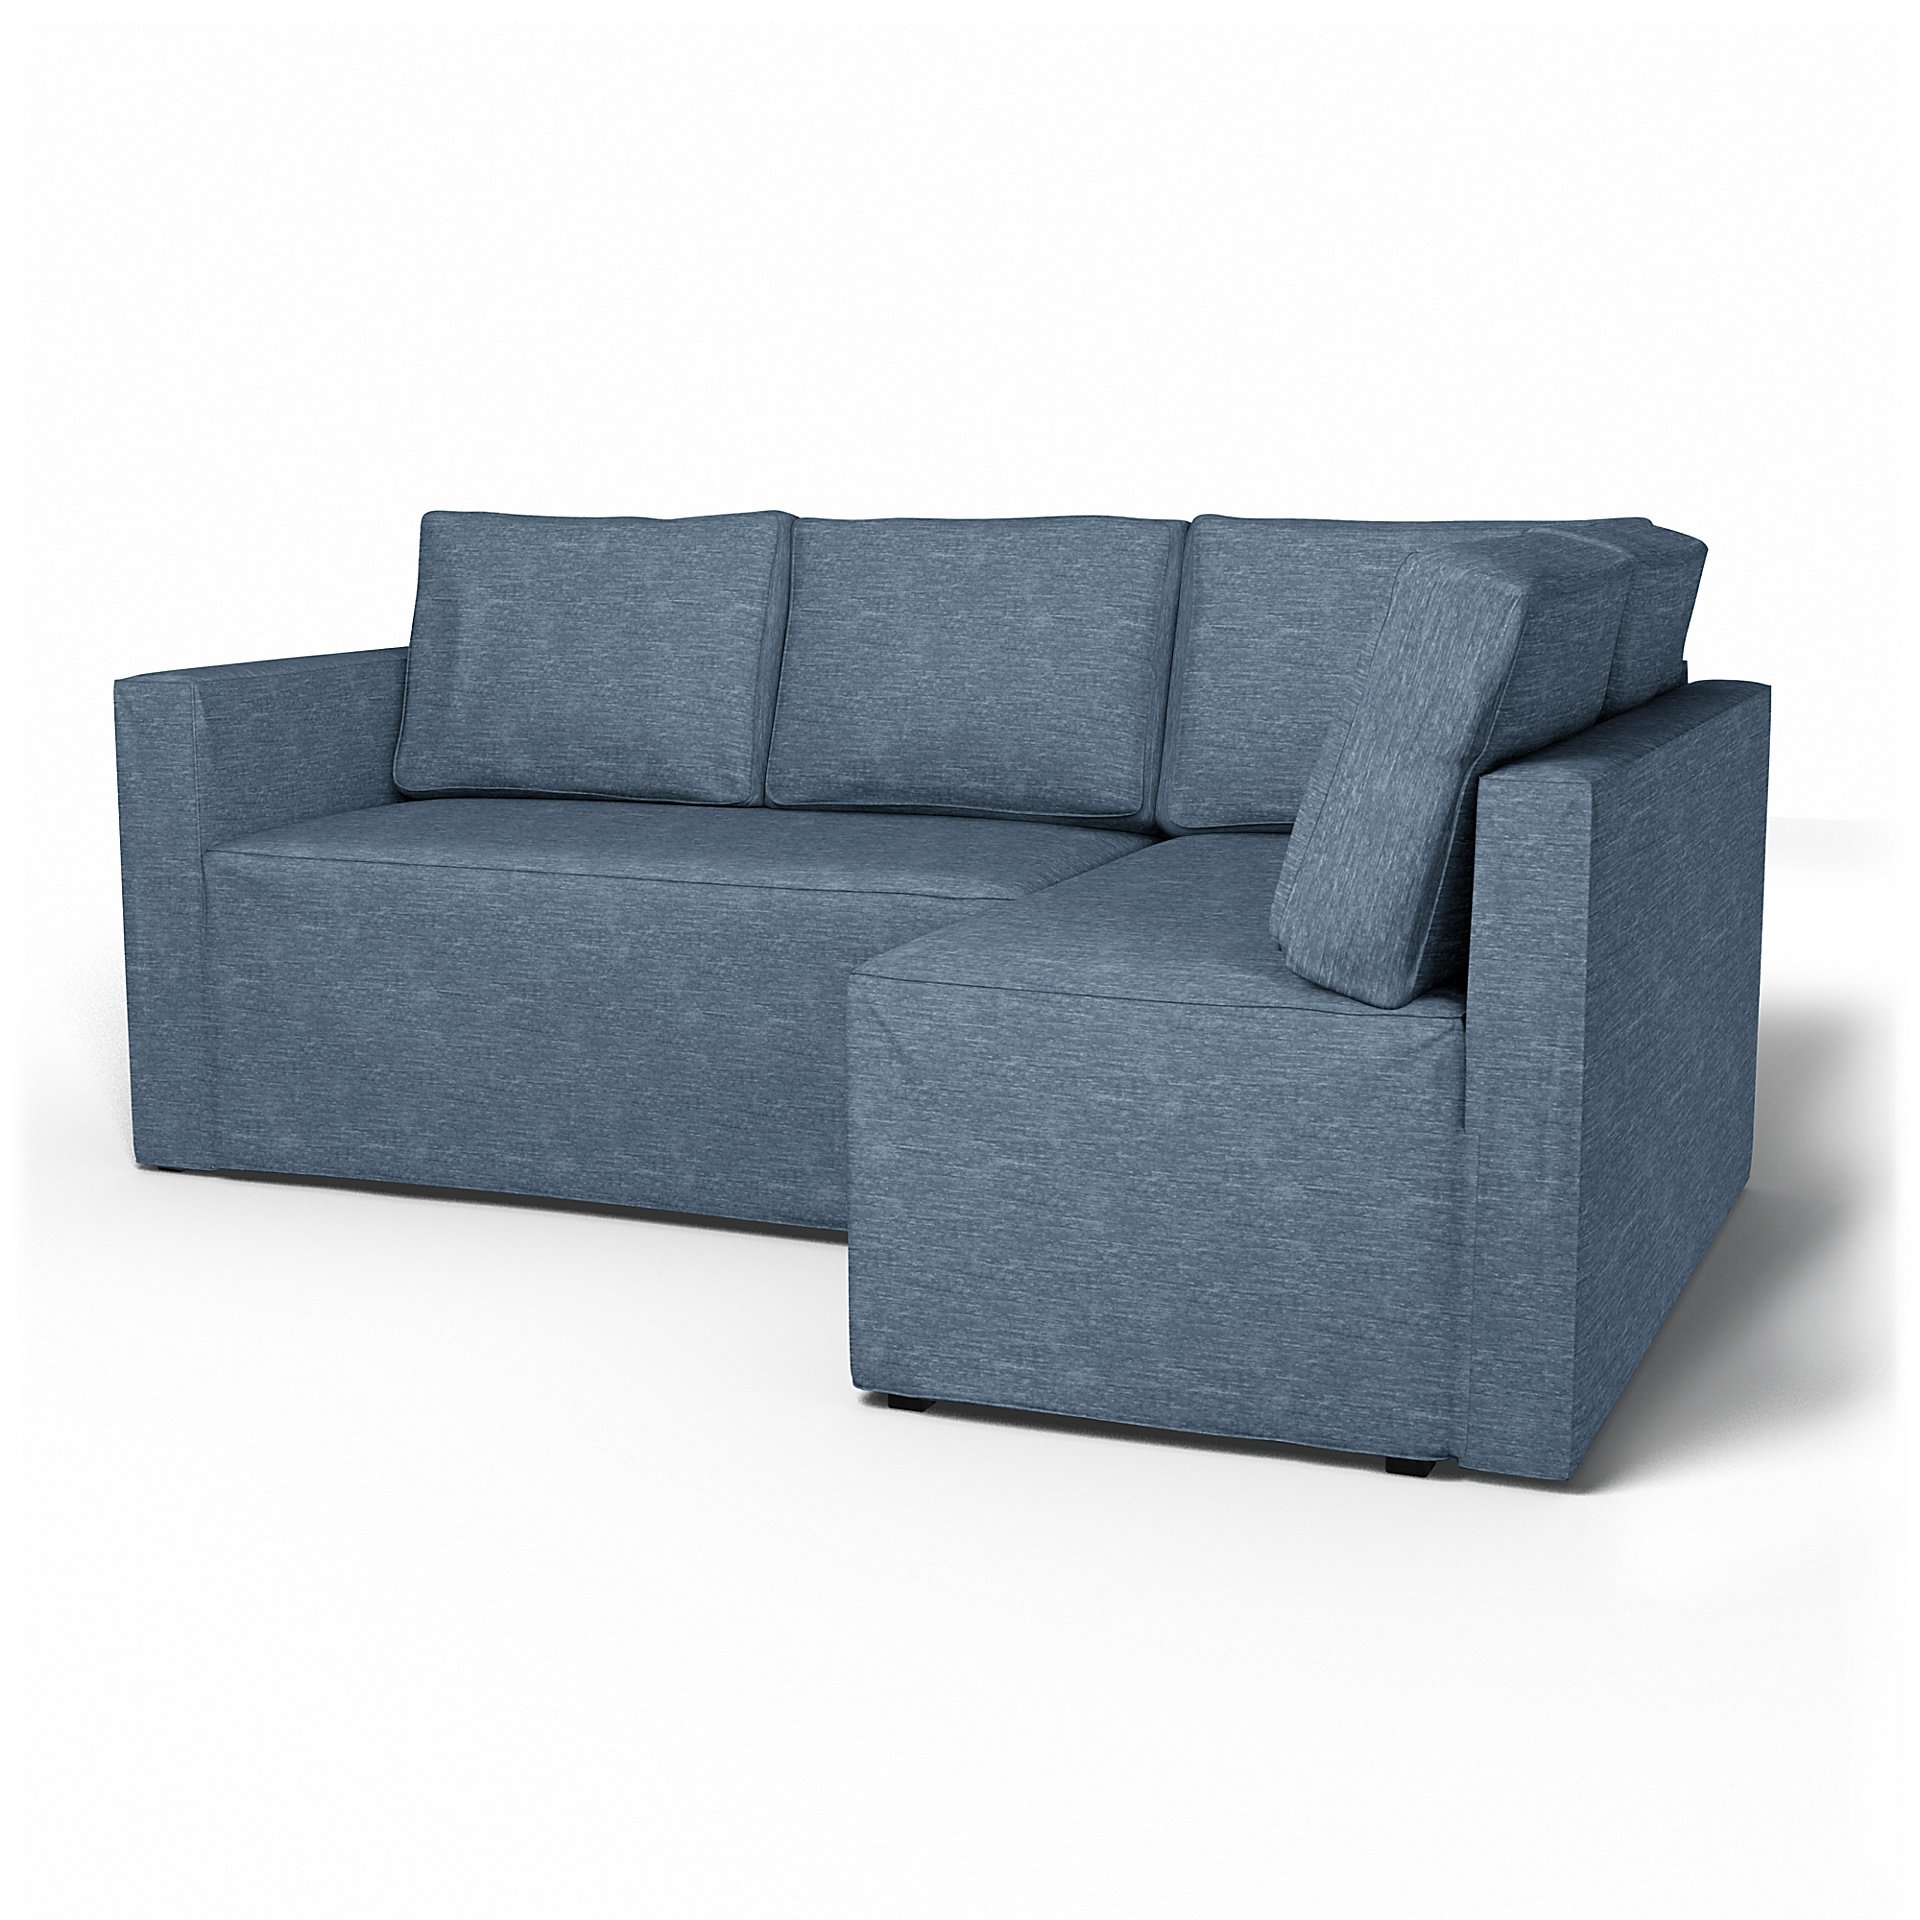 IKEA - Fagelbo Sofa Bed with Right Chaise Cover, Mineral Blue, Velvet - Bemz